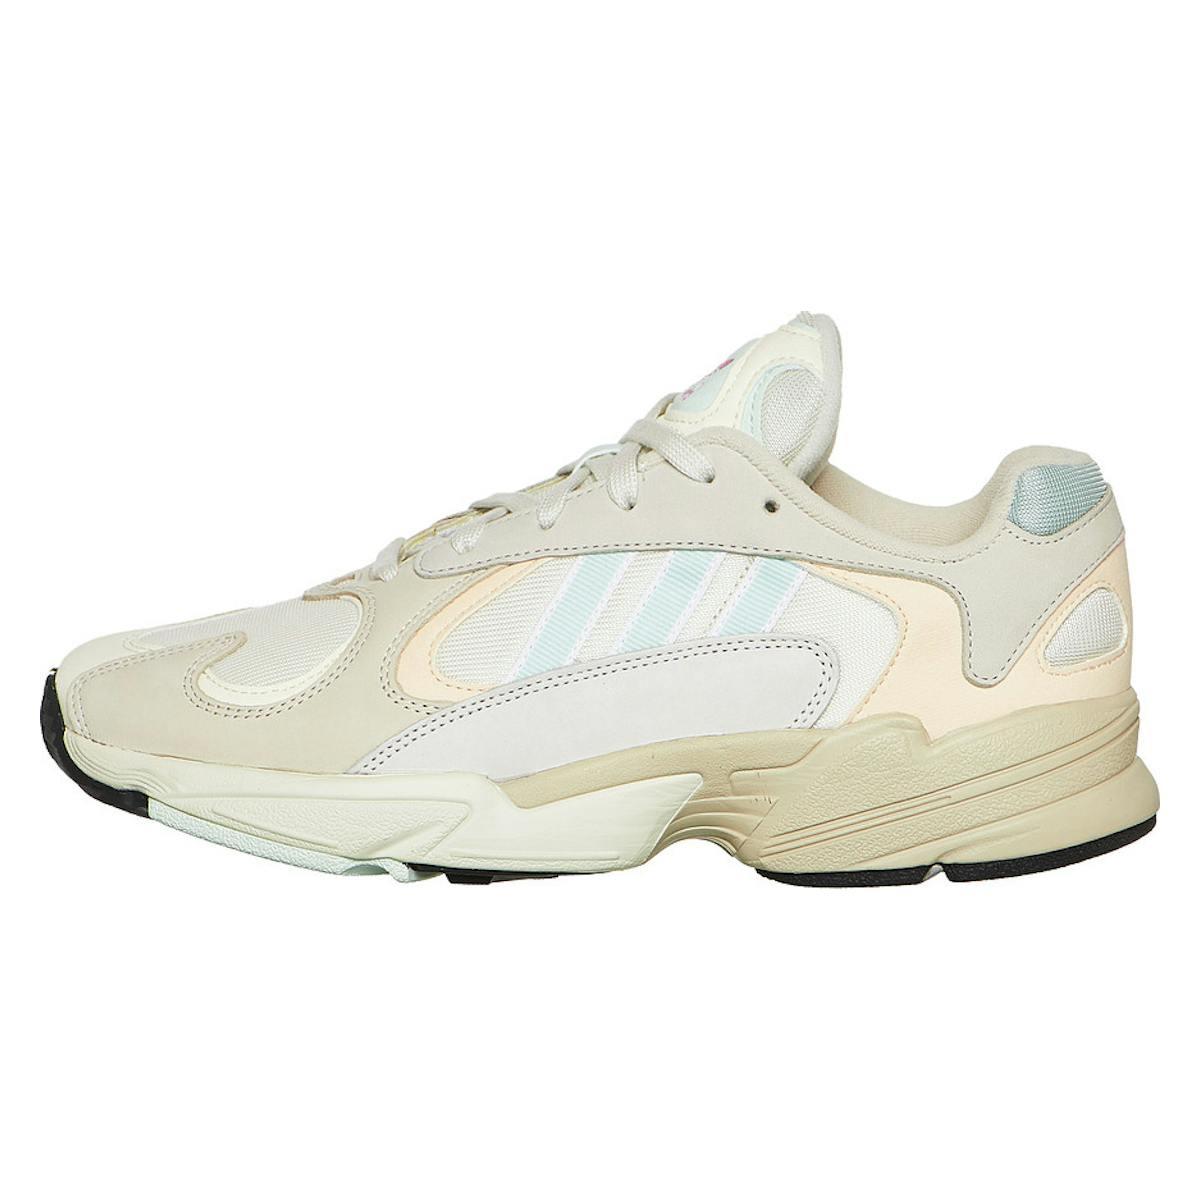 adidas Yung-1 Off White Ice Mint